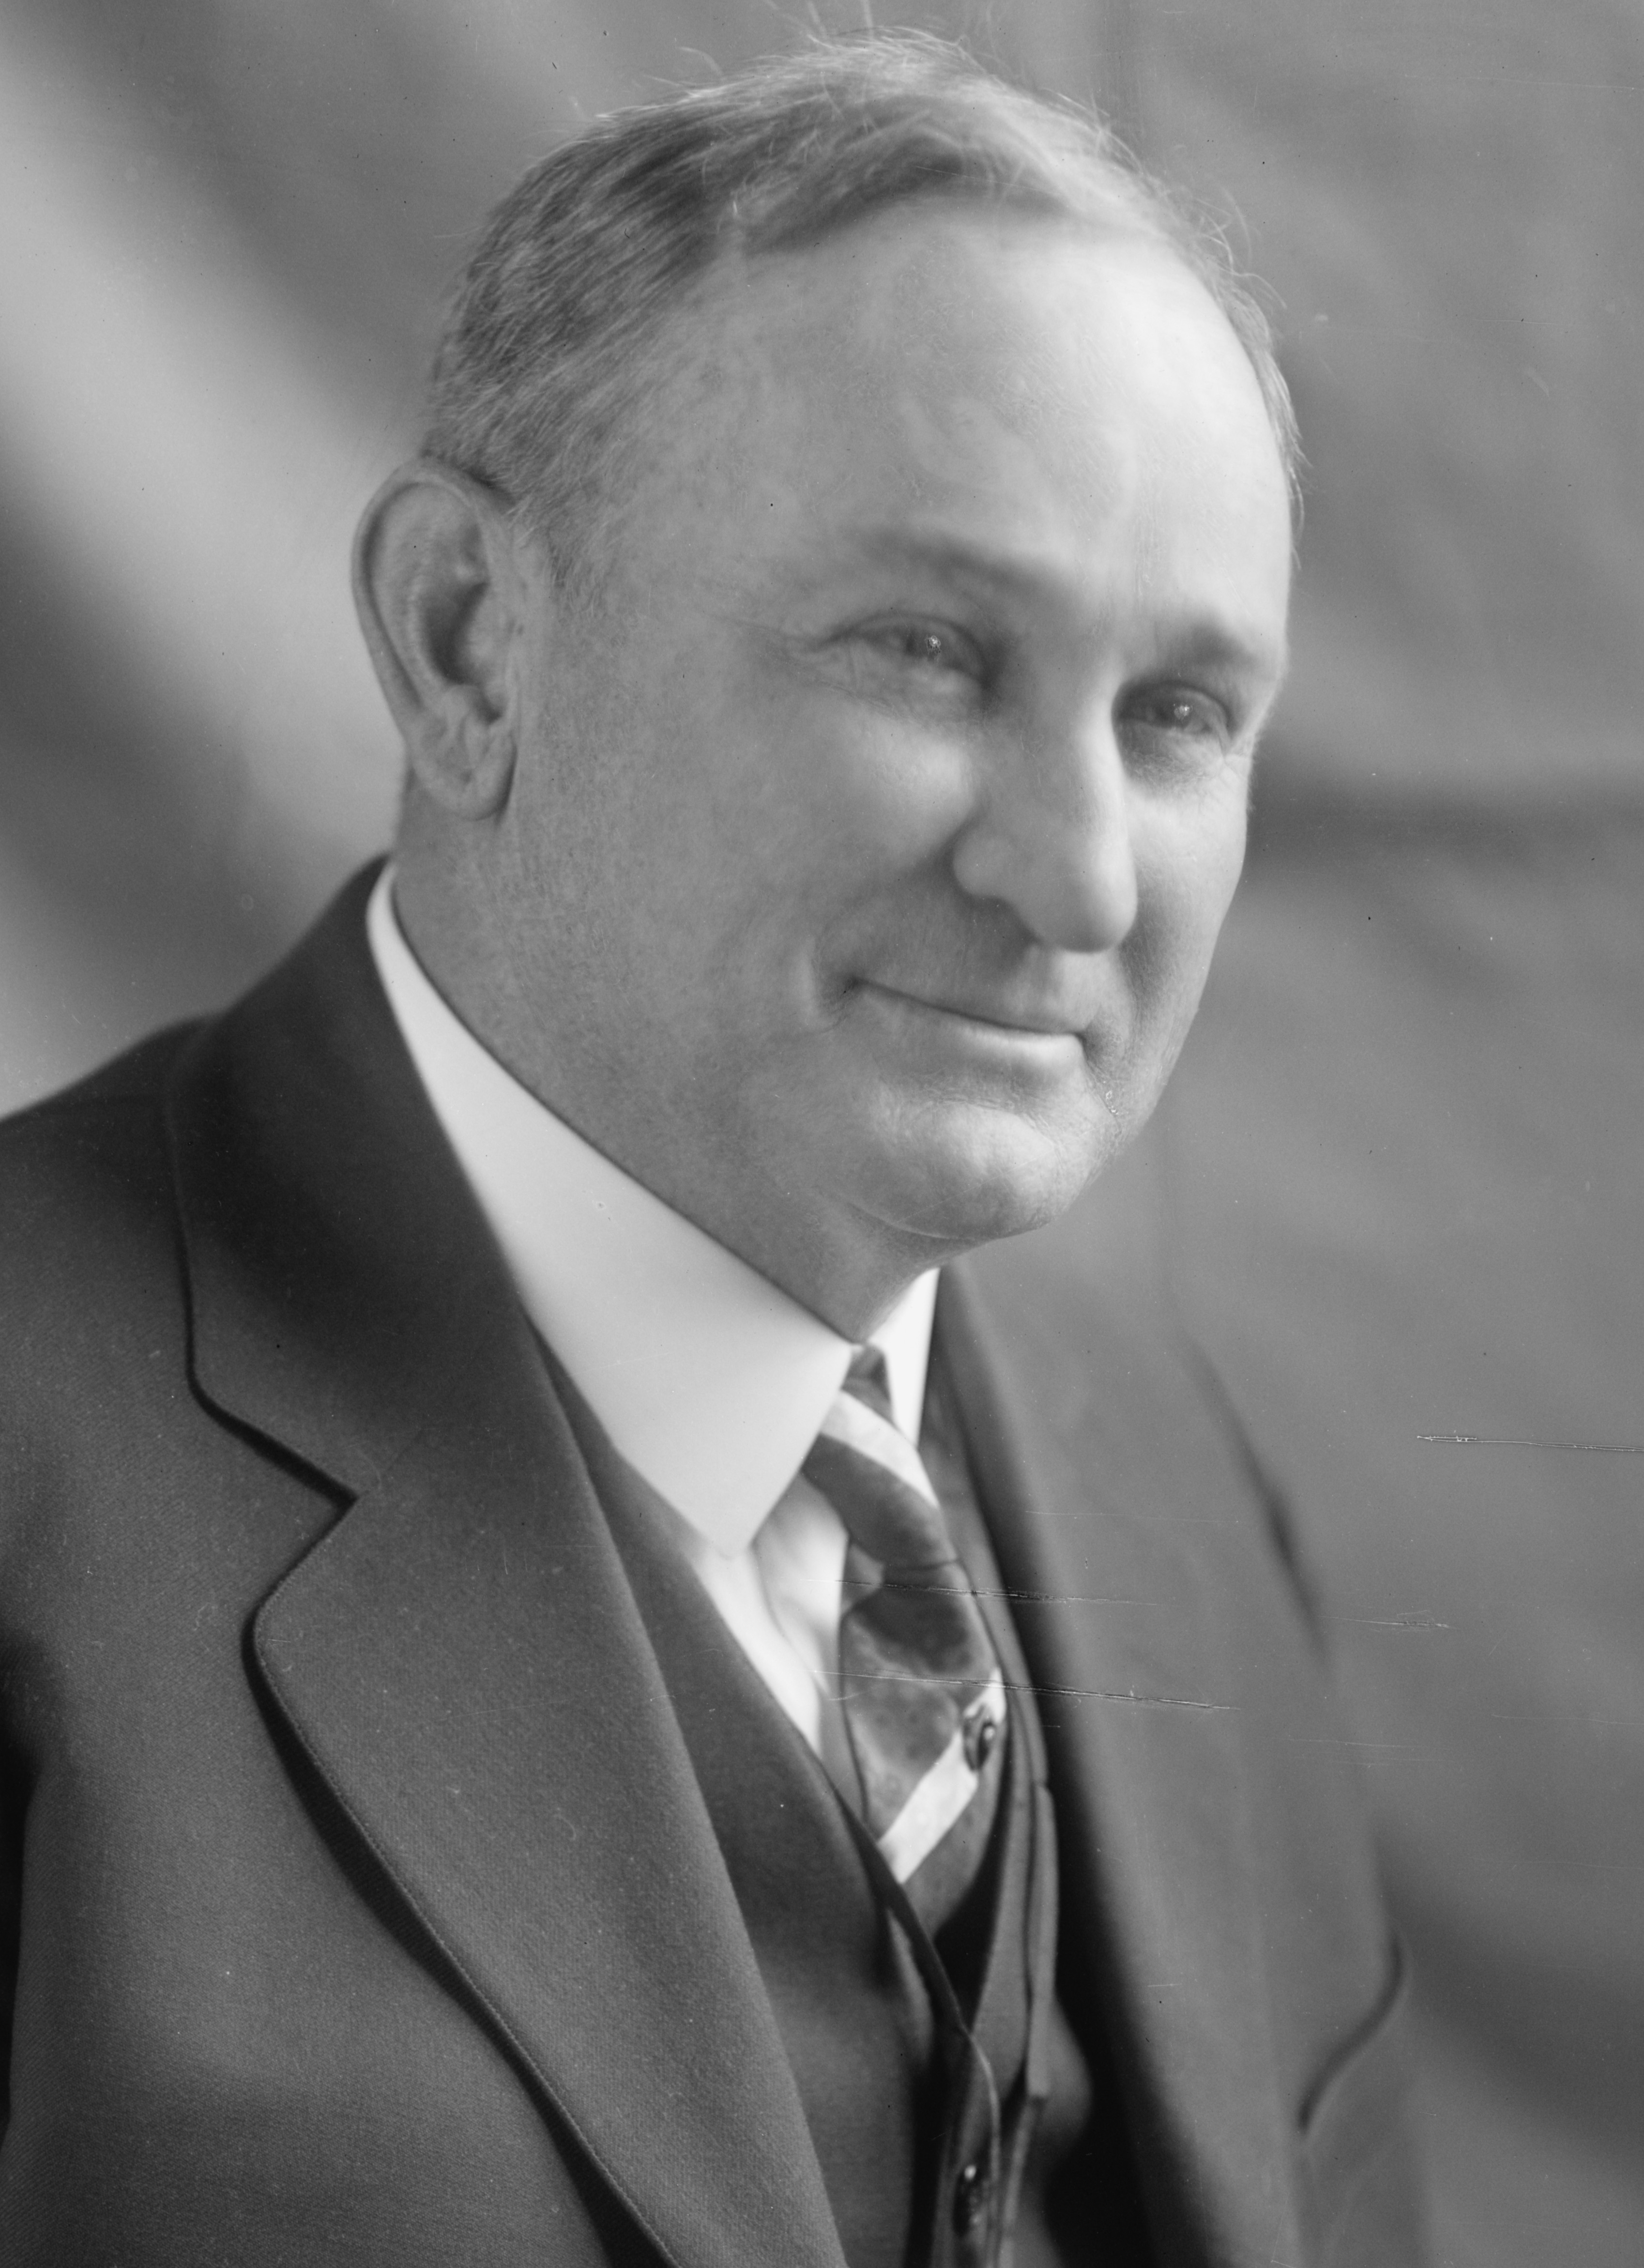 Joseph T. Robinson received the Democratic vice presidential nomination in 1928 instead of Barkley.